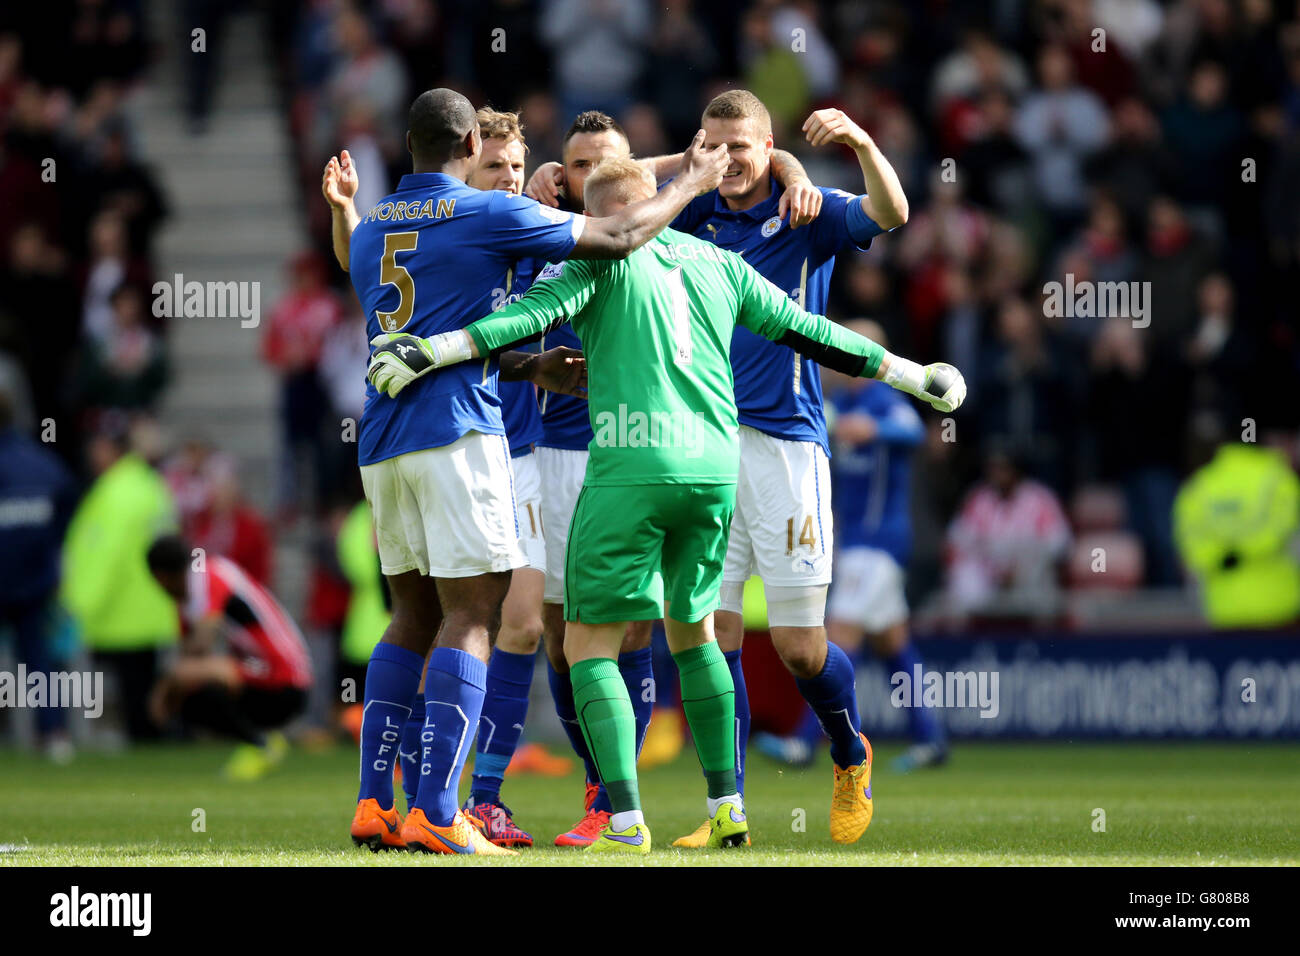 Leicester players celebrate Premiership survival after the 0-0 draw during the Barclays Premier League match at The Stadium of Light, Sunderland. Stock Photo